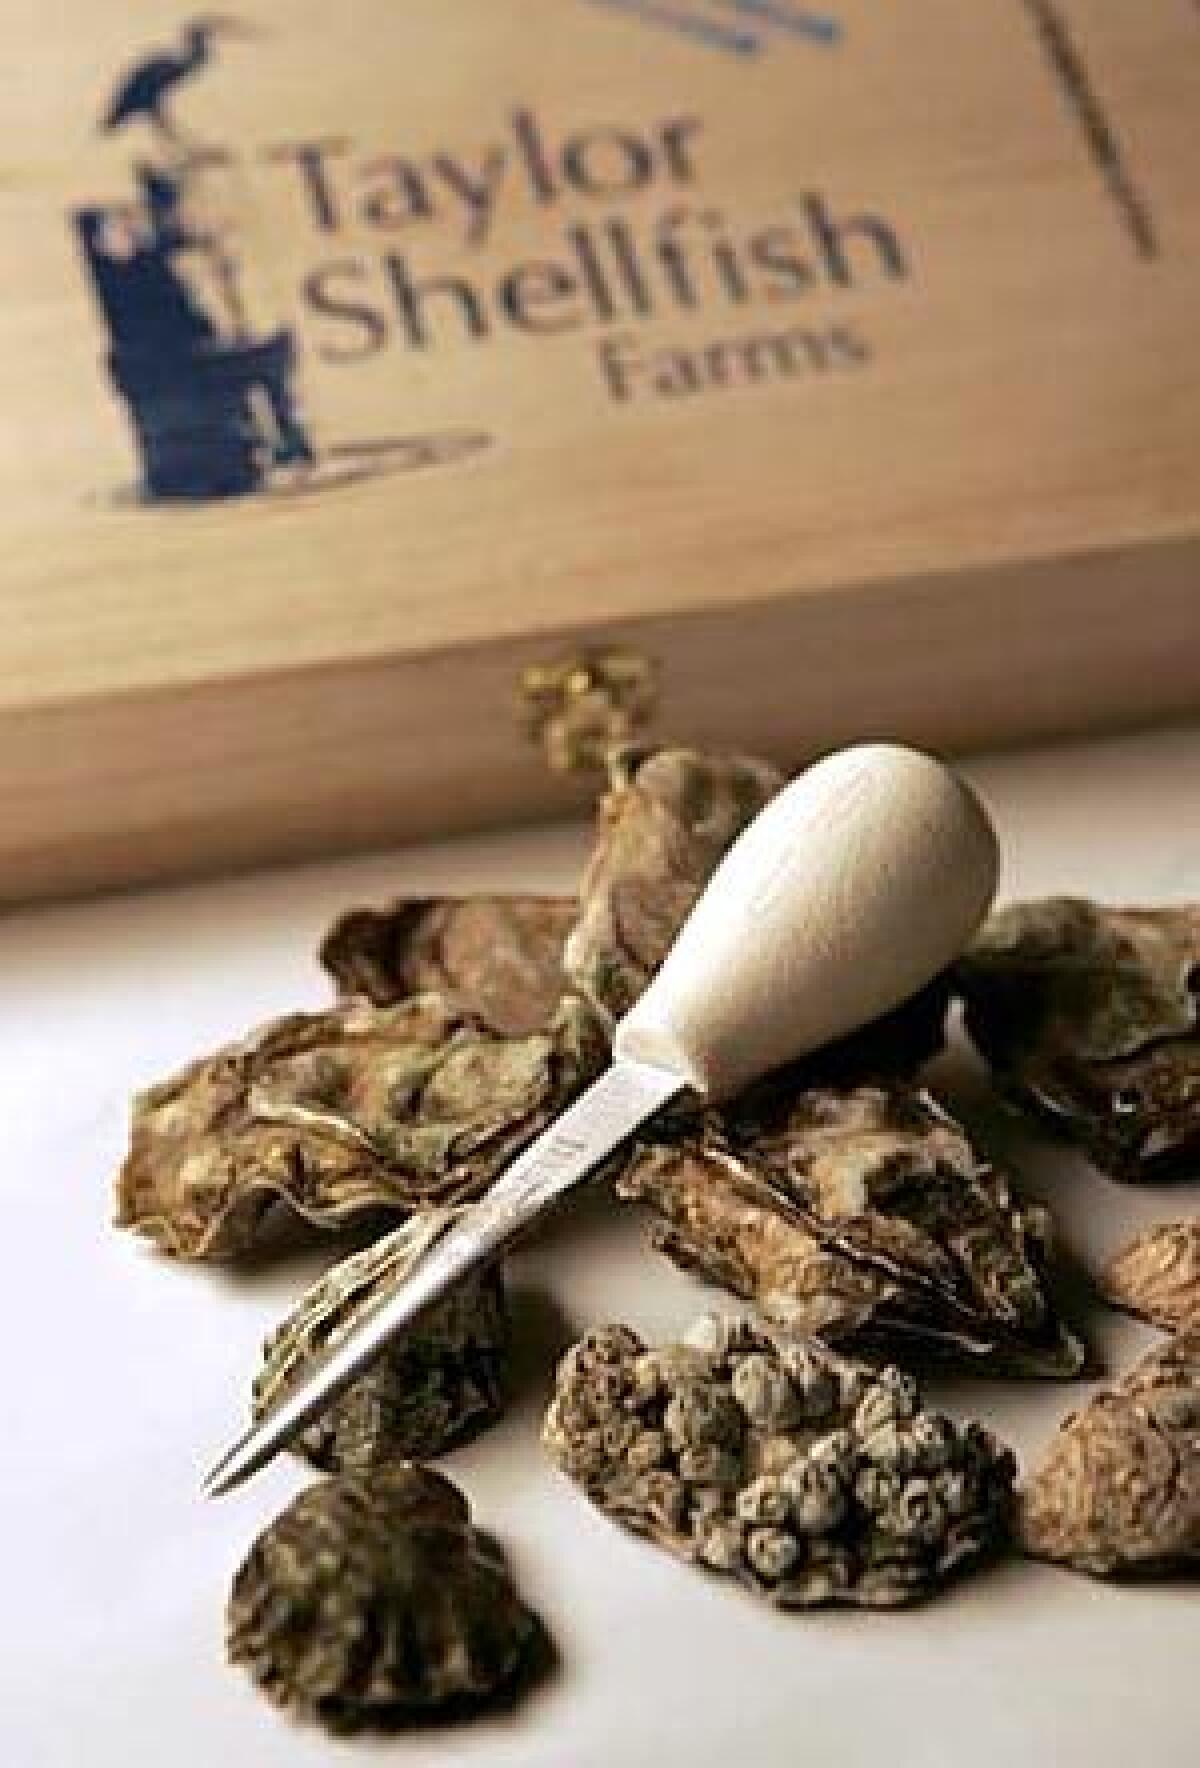 A gift box from Taylor Shellfish Farms includes oysters, an oyster knife, shucking instructions and a copy of seafood maven Jon Rowleys essay on the art of eating an oyster.